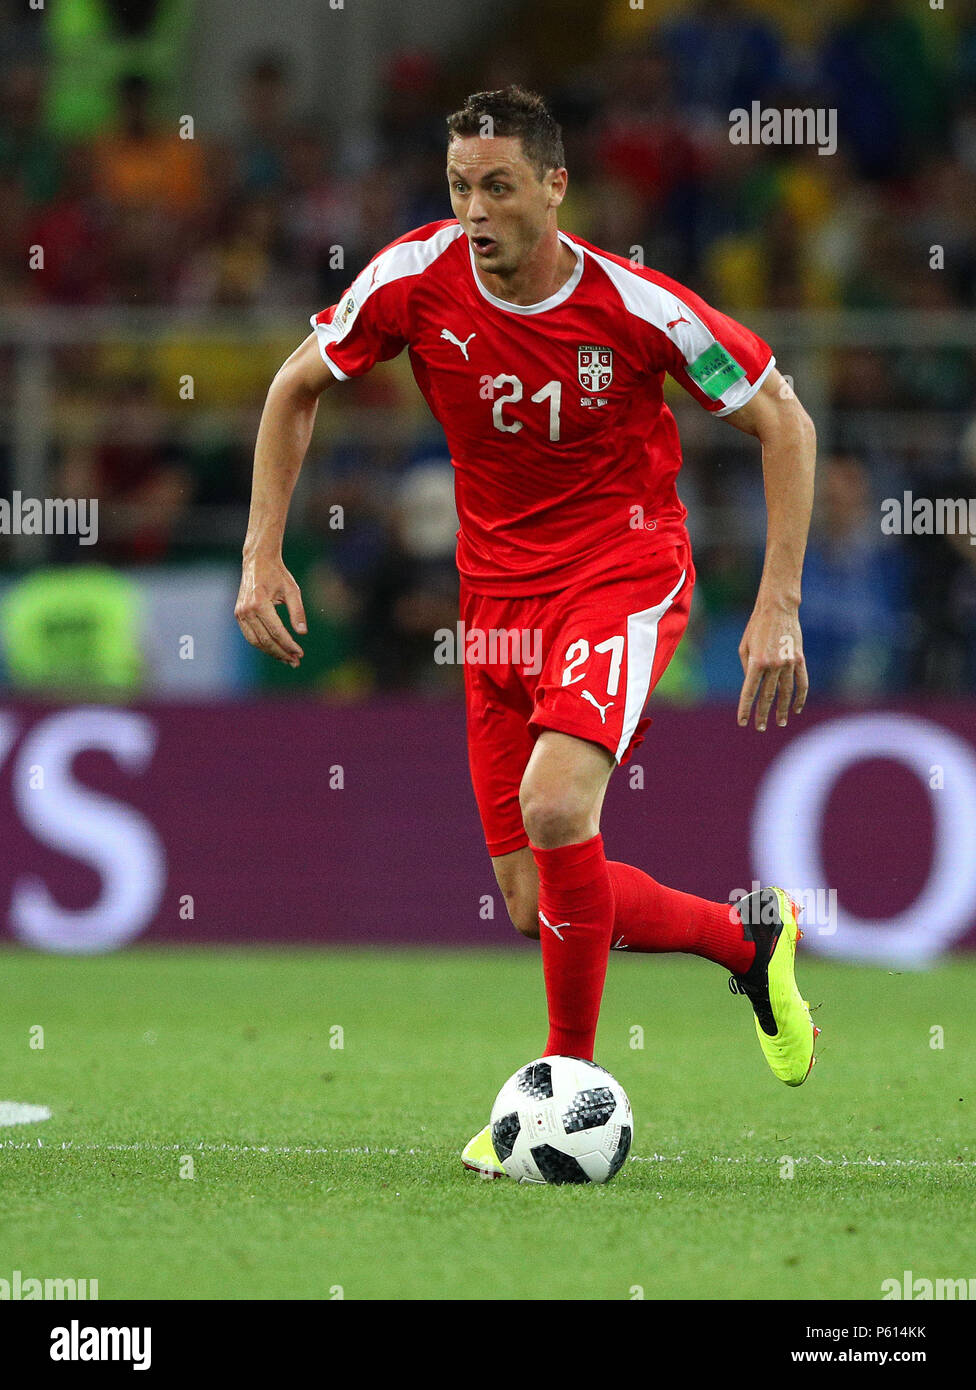 Moscow, Russia, 27 June 2018. SERBIA VS BRAZIL - Nemanja MATIC from Serbia during the match between Serbia and Brazil valid for the 2018 World Cup held at the Otkrytie Arena (Spartak) in Moscow, Russia. (Photo: Rodolfo Buhrer/La Imagem/Fotoarena) Credit: Foto Arena LTDA/Alamy Live News Stock Photo